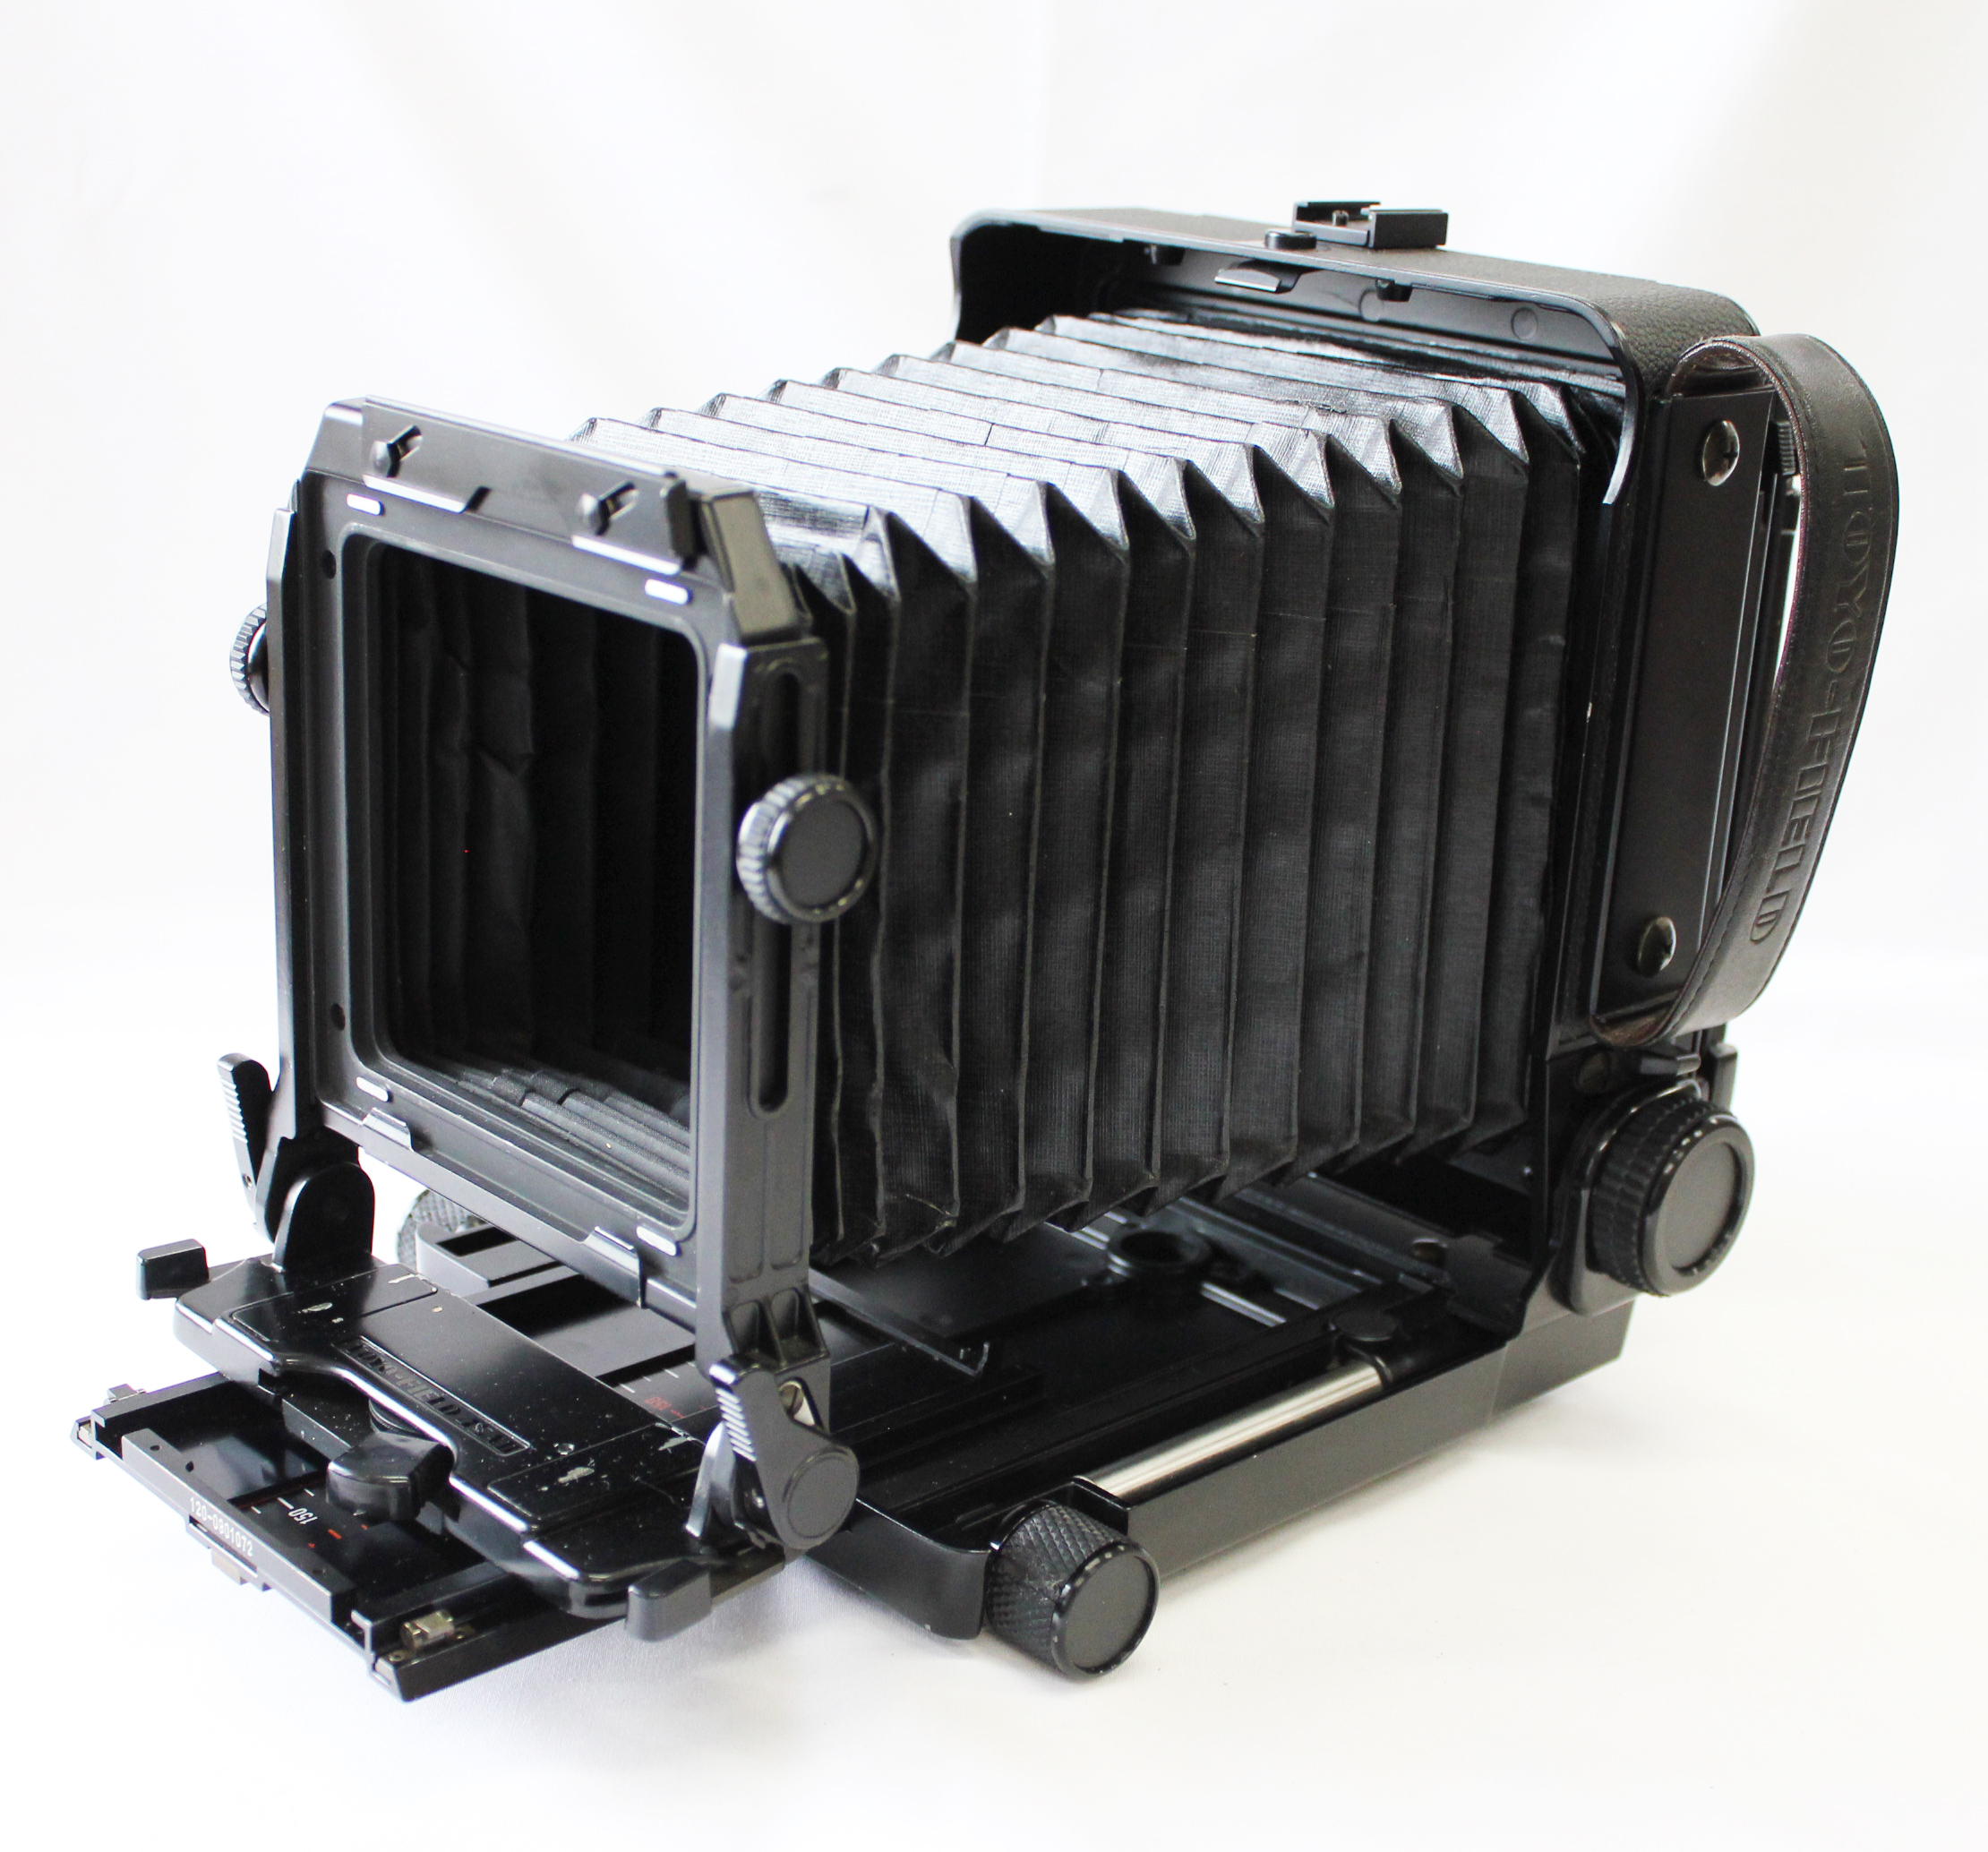 Japan Used Camera Shop | [Excellent+++++] Toyo Field 45A II 4x5 Large Format Camera from Japan